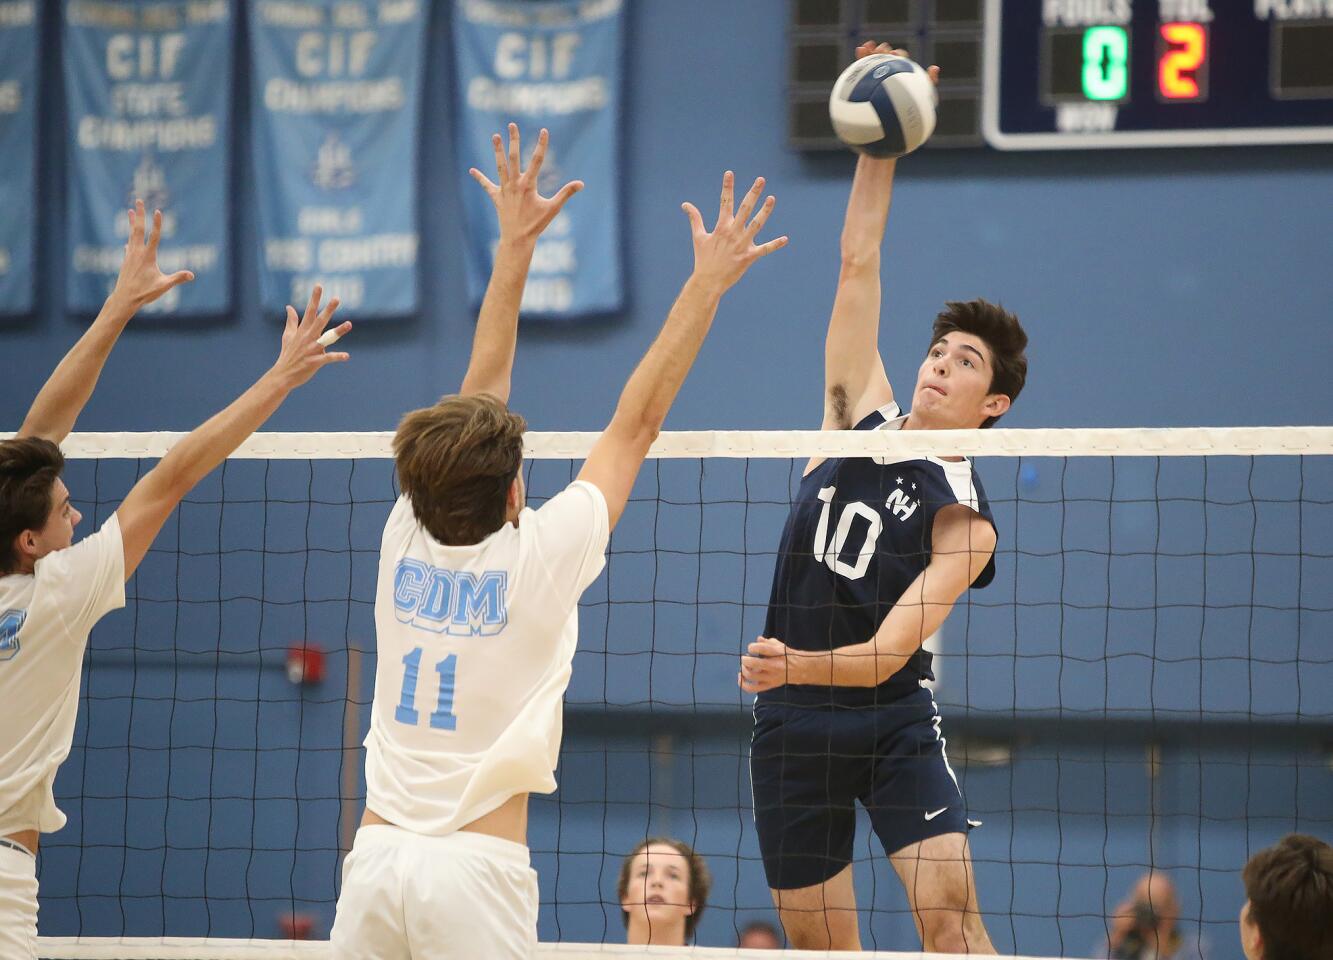 Newport Harbor's Caden Garrido (10) puts a kill past Corona Del Mar blocker Glen Linden (11) during second round of the Battle of the Bay boys' volleyball match in Surf League play on Wednesday.